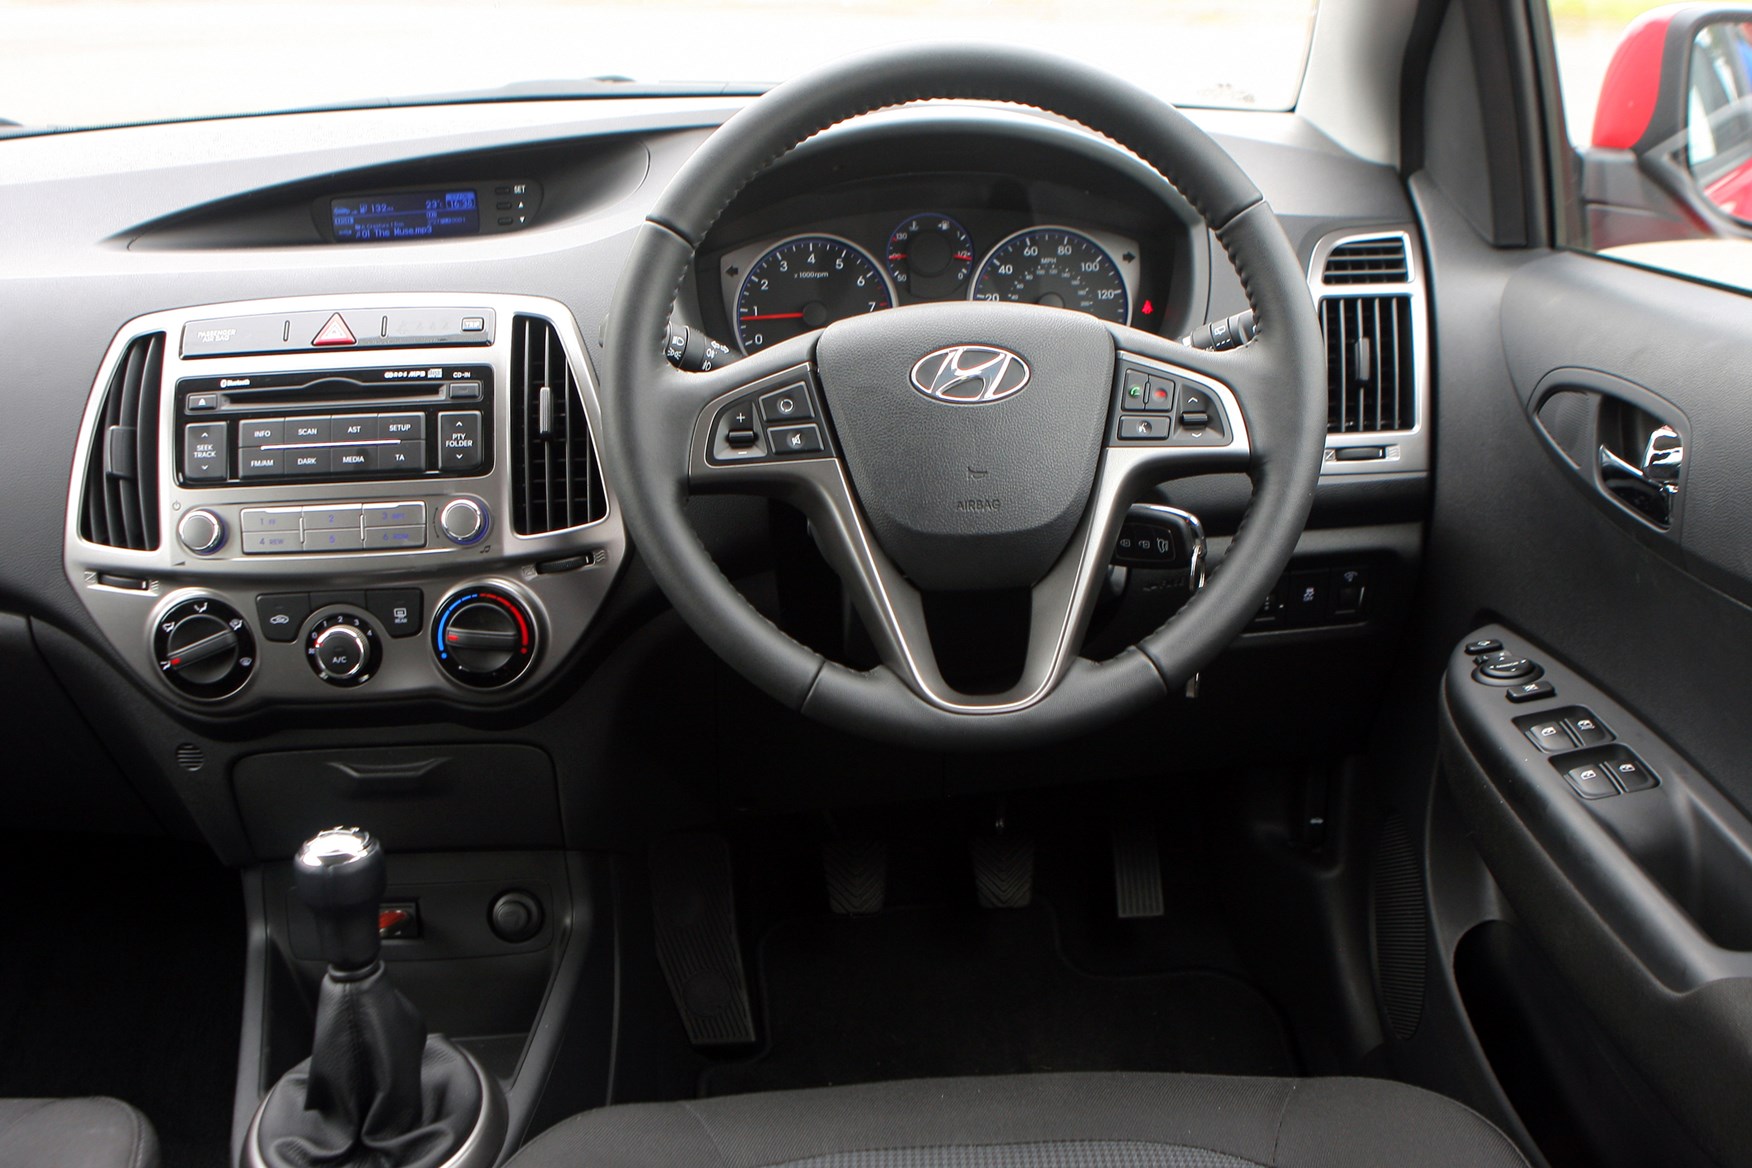 Used Hyundai i20 Hatchback (2009 2014) Review Parkers